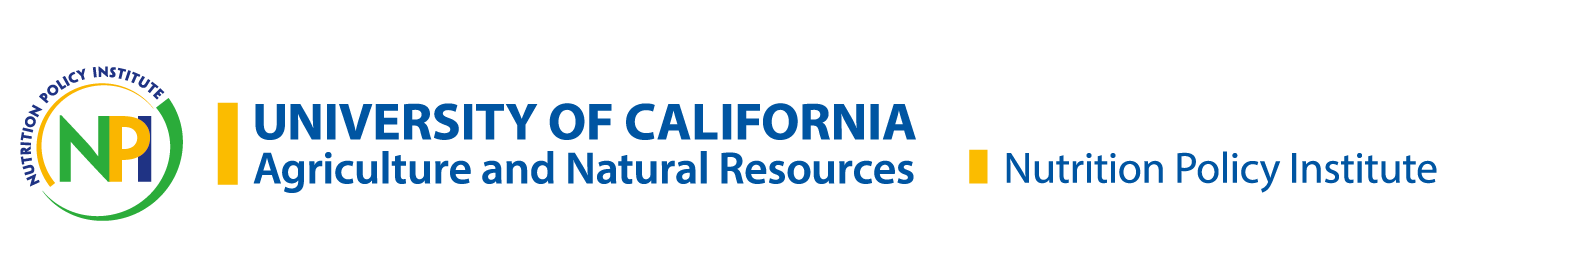 Nutrition Policy Institute, University of California, Division of Agriculture and Natural Resources logo